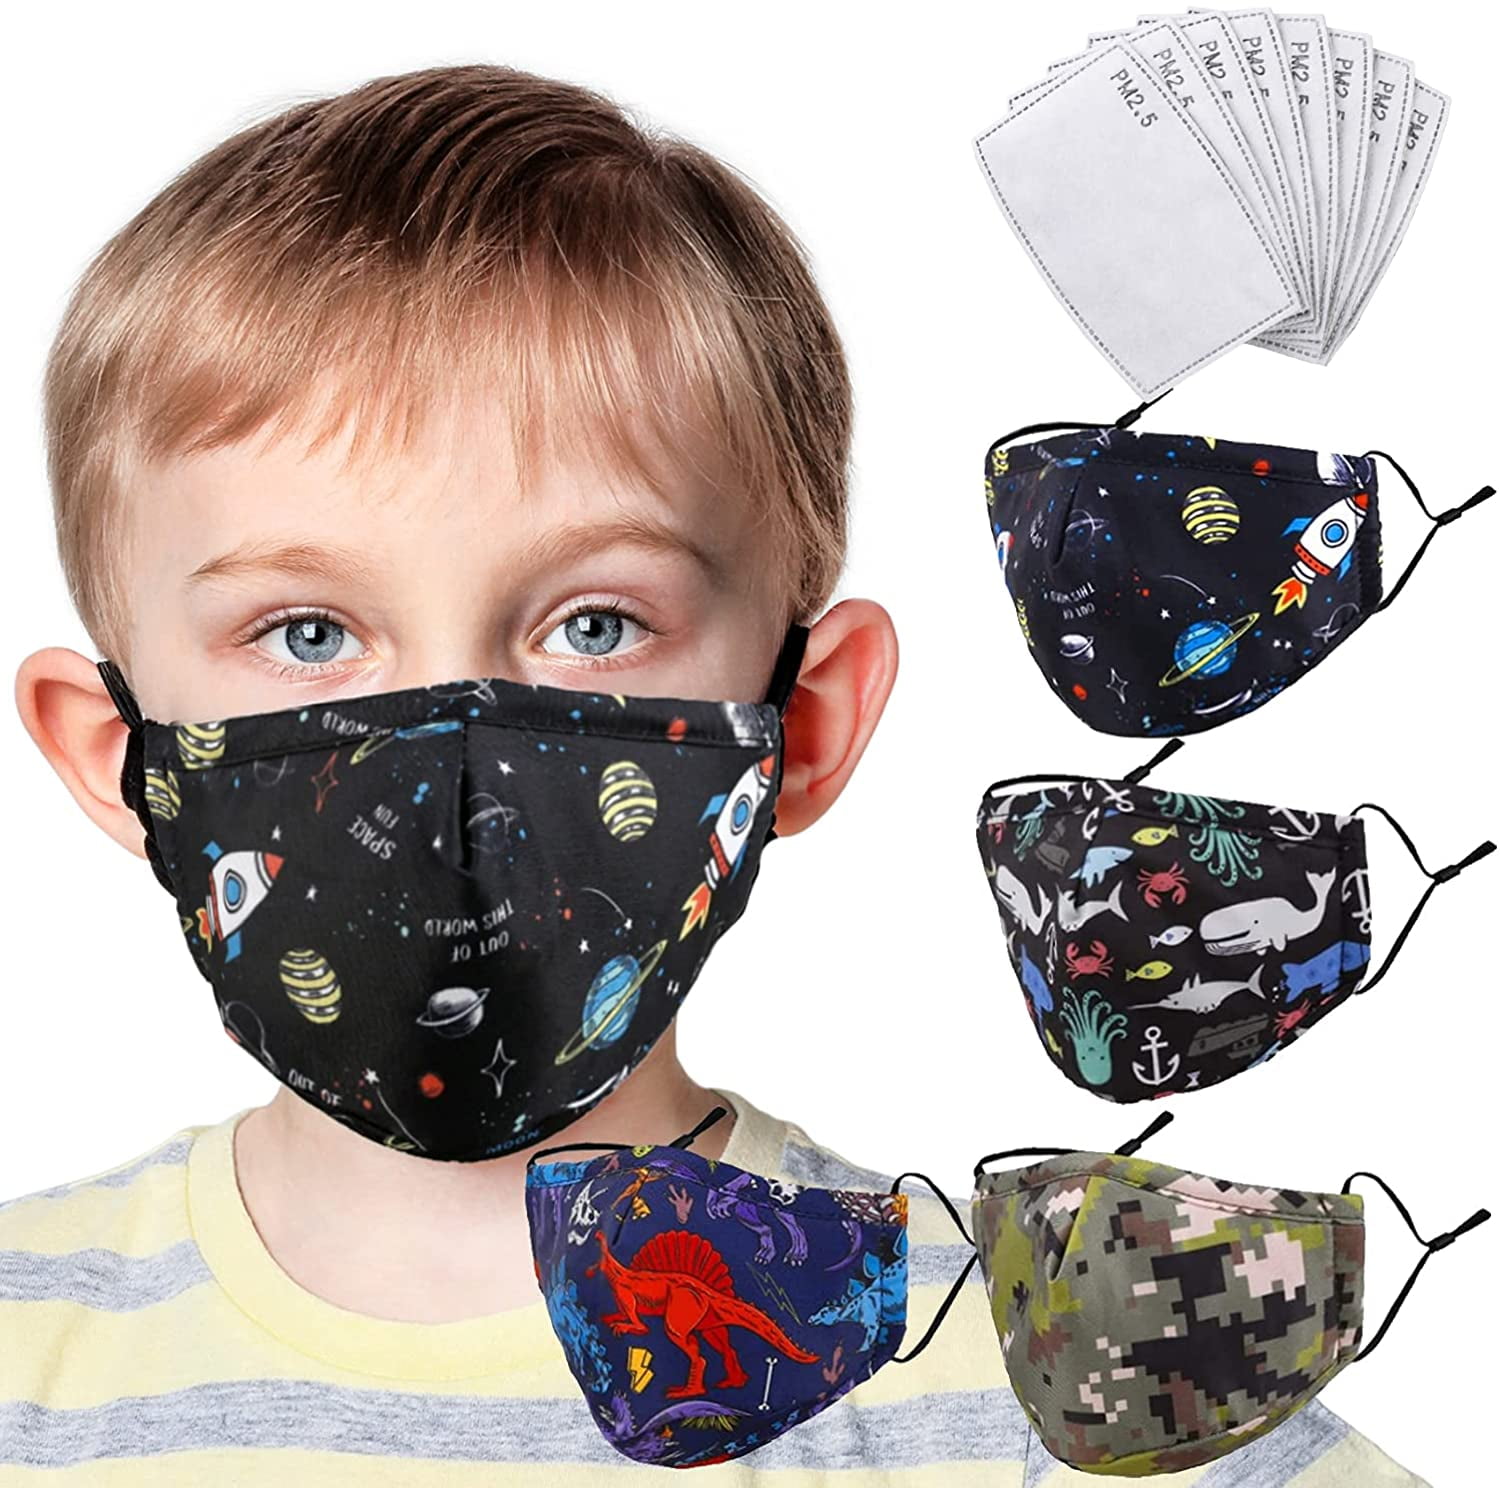 daily use Face Mask- PPE washable reusable has slot for filter assorted color 